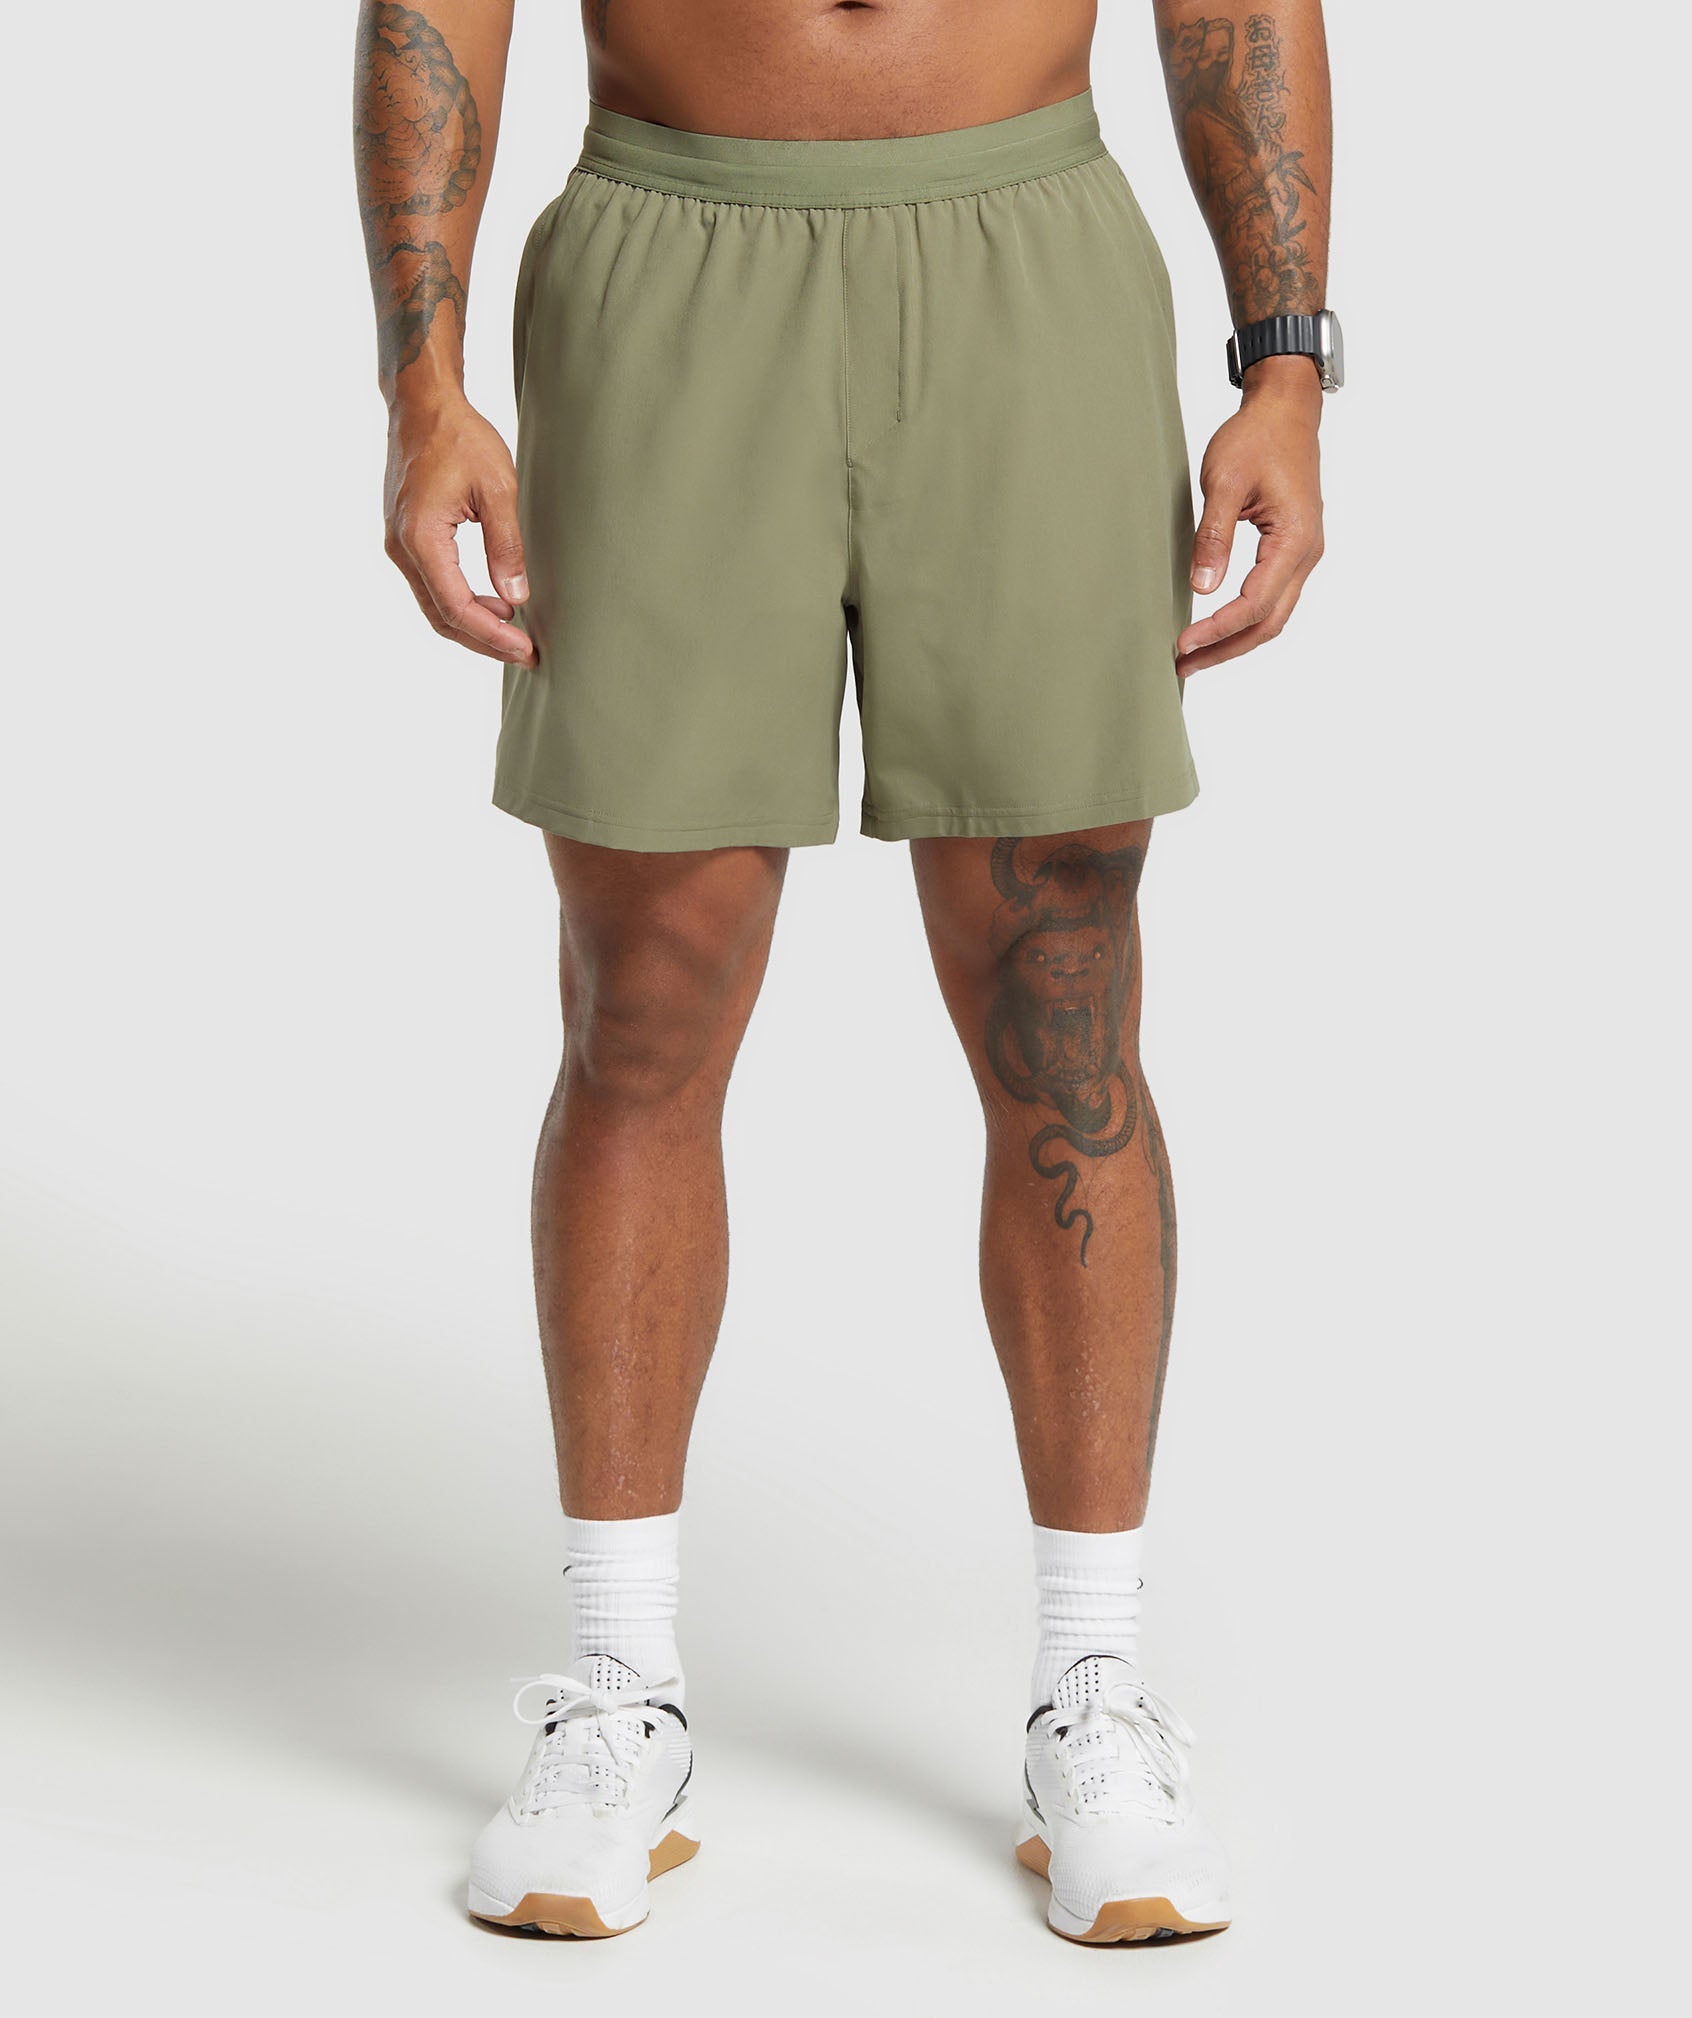 Land to Water 6" Shorts in Utility Green